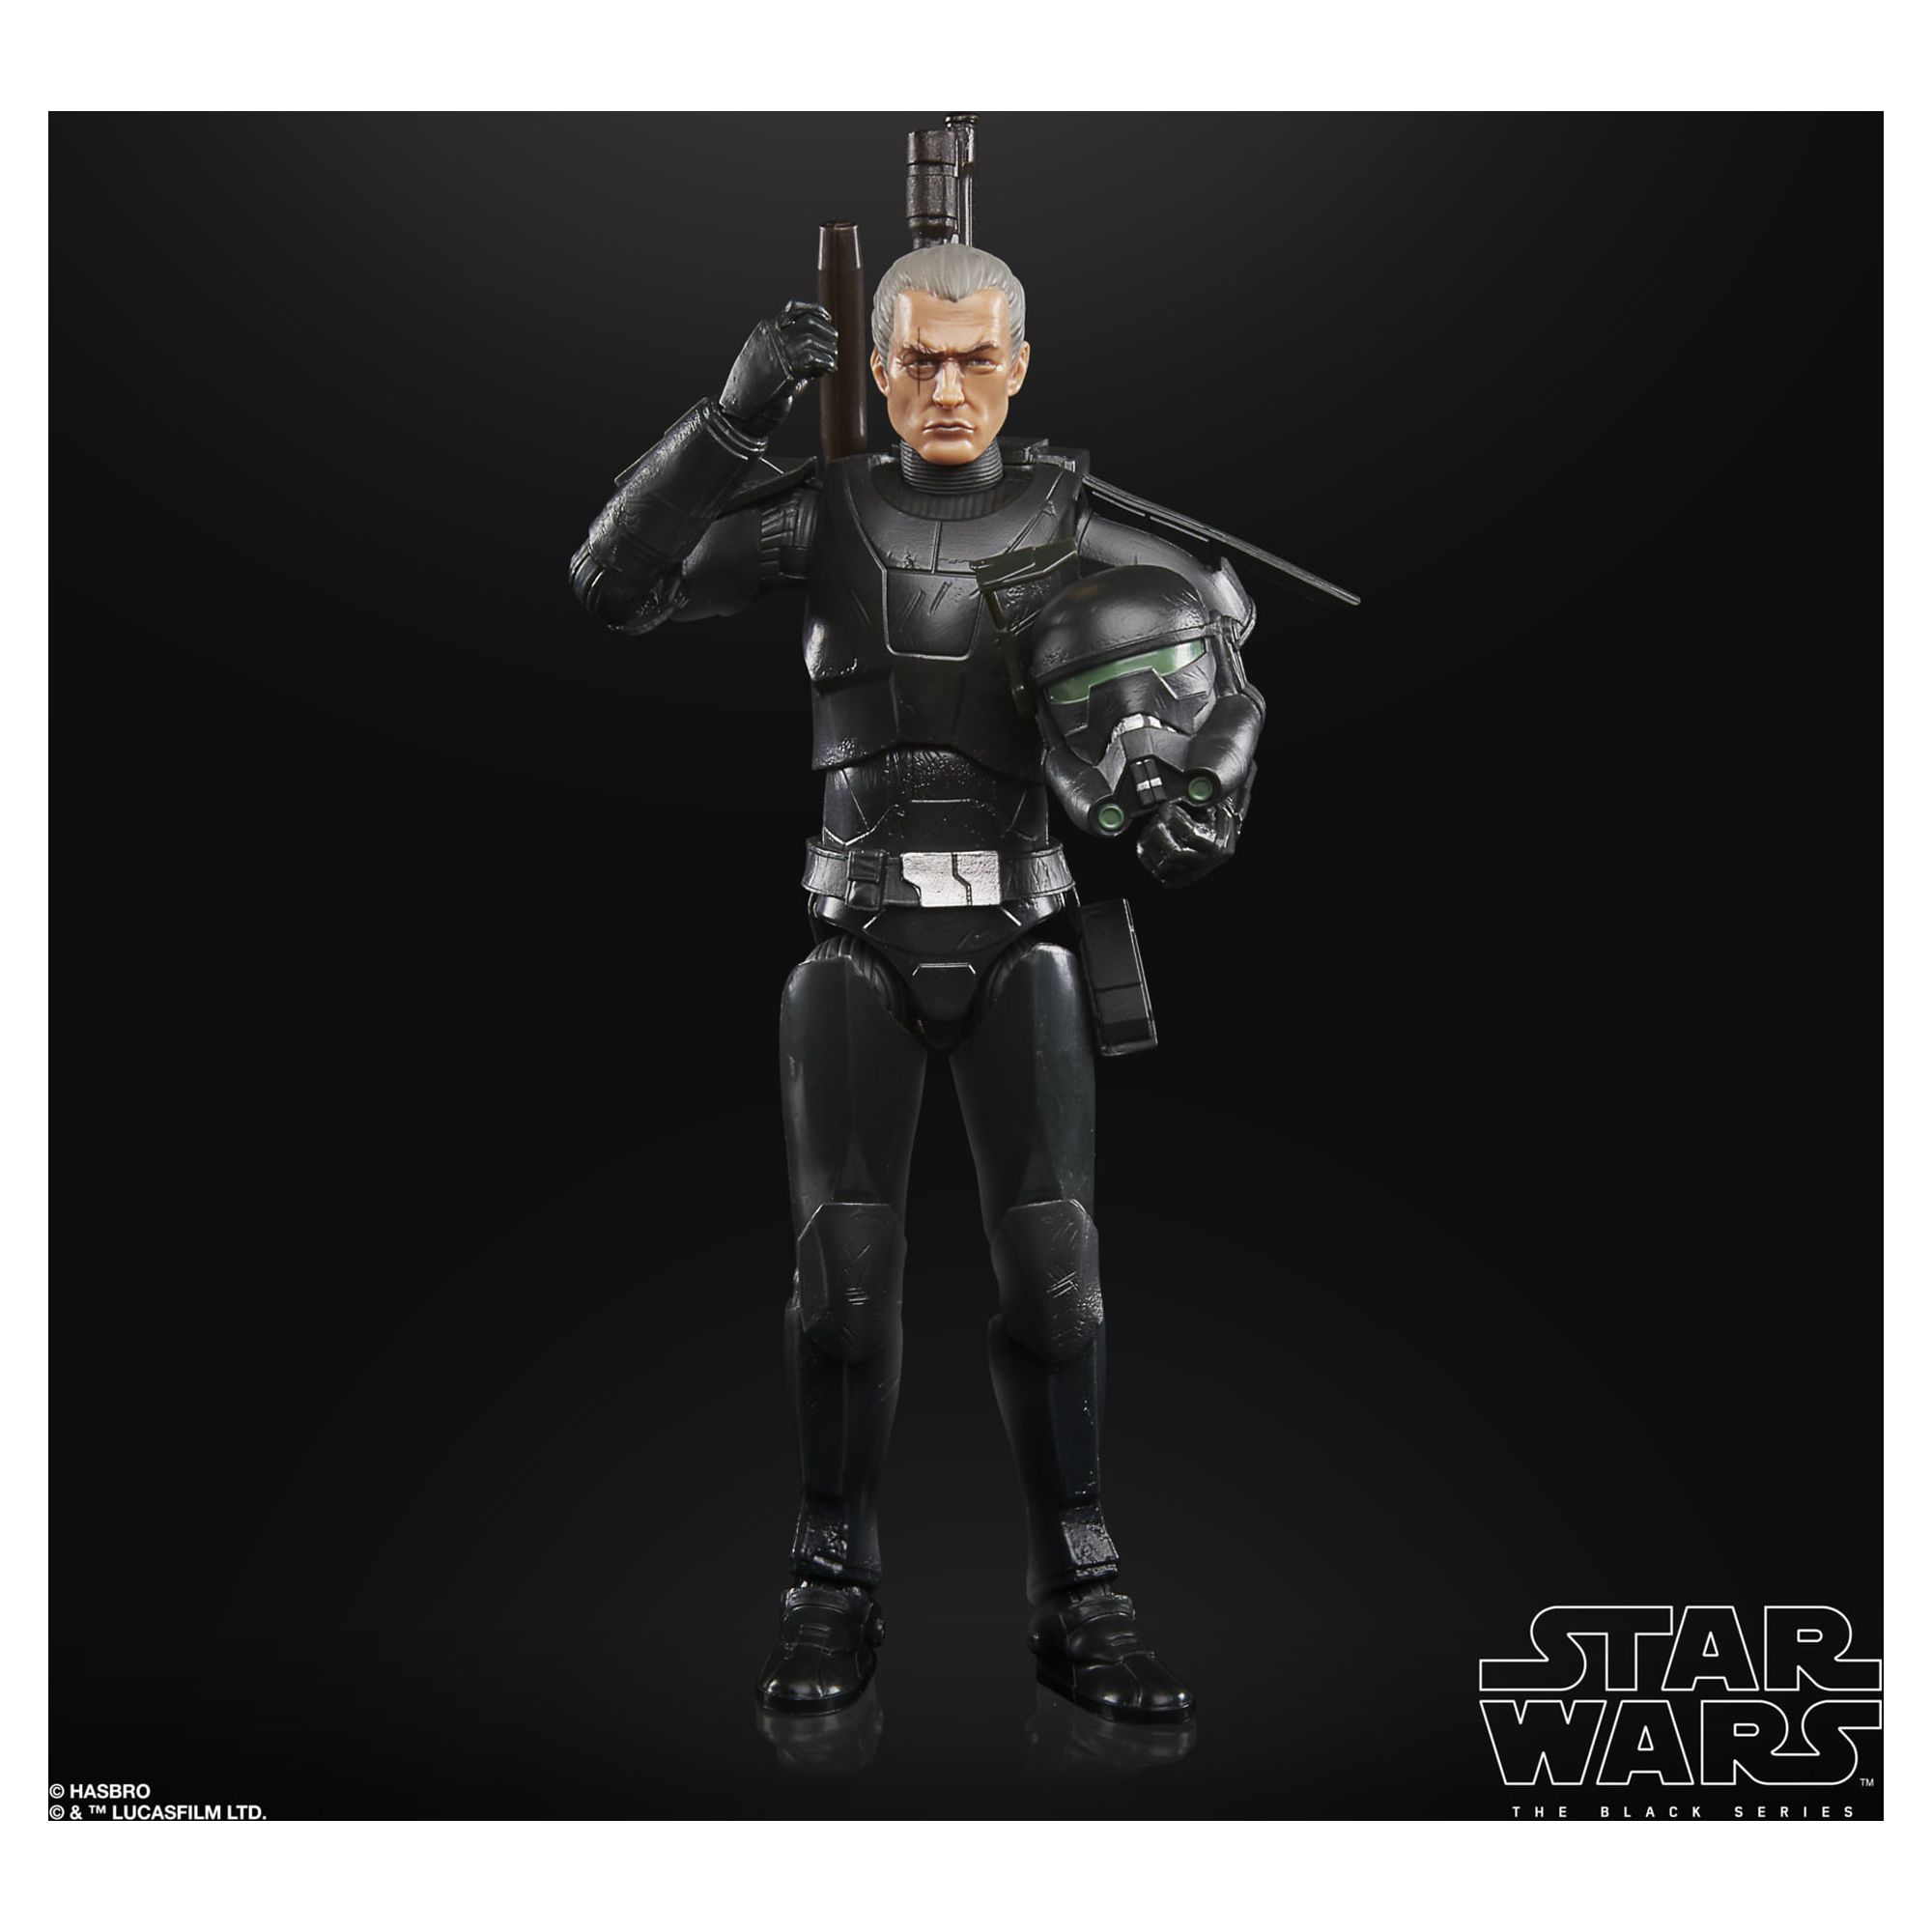 Star Wars: The Black Series Crosshair (Imperial) Kids Toy Action Figure for Boys and Girls Ages 4 5 6 7 8 and Up - image 5 of 8